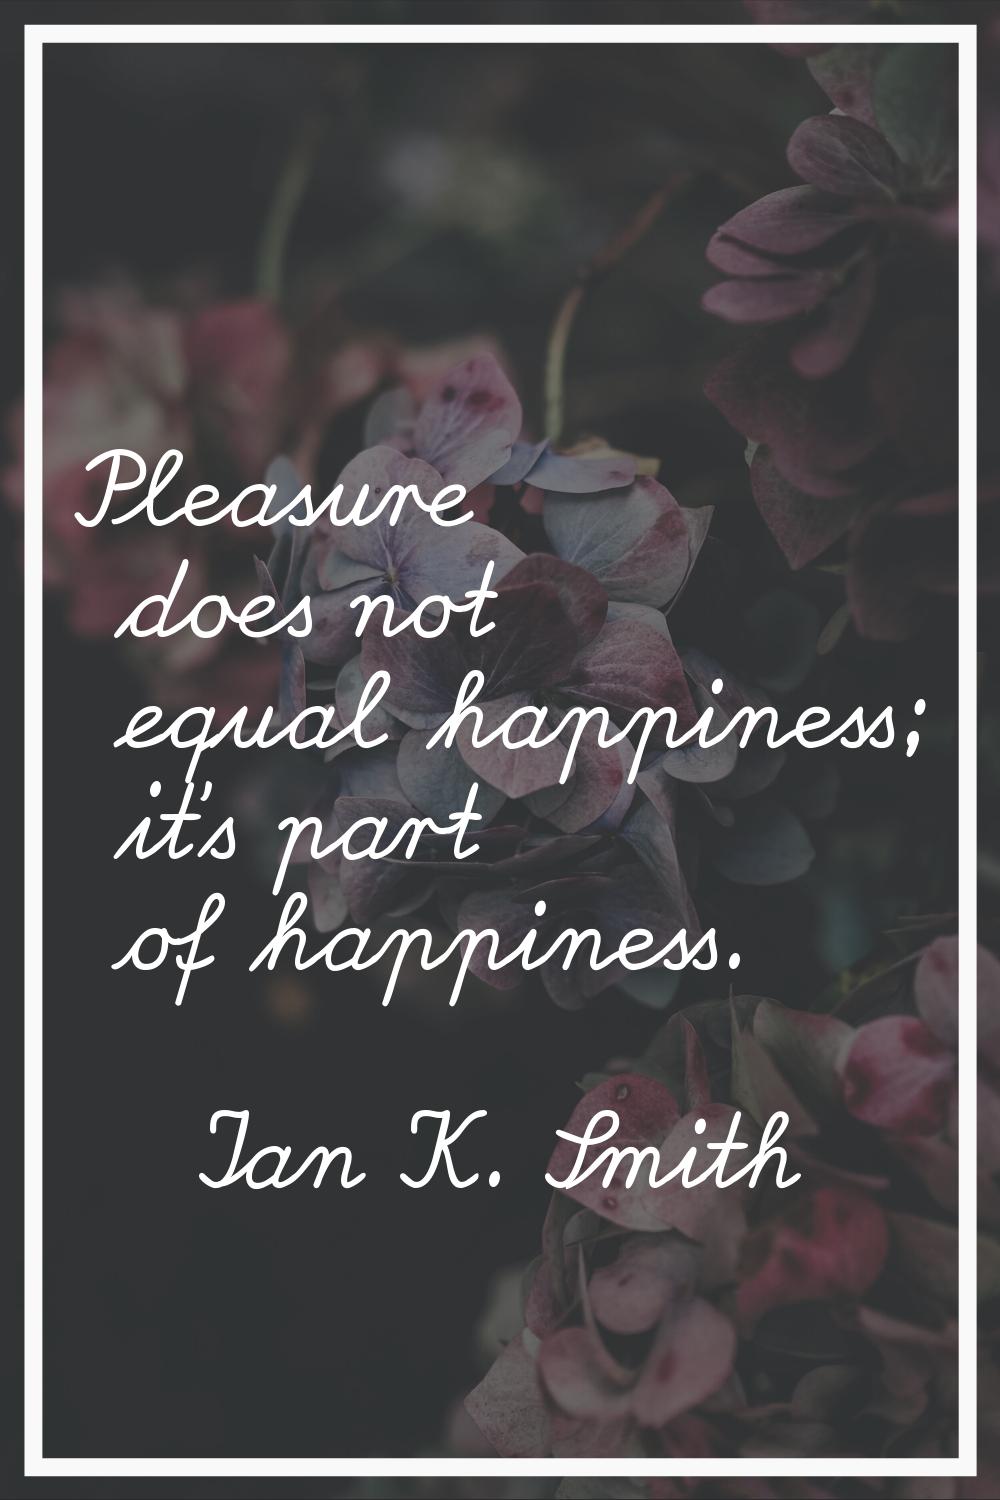 Pleasure does not equal happiness; it's part of happiness.